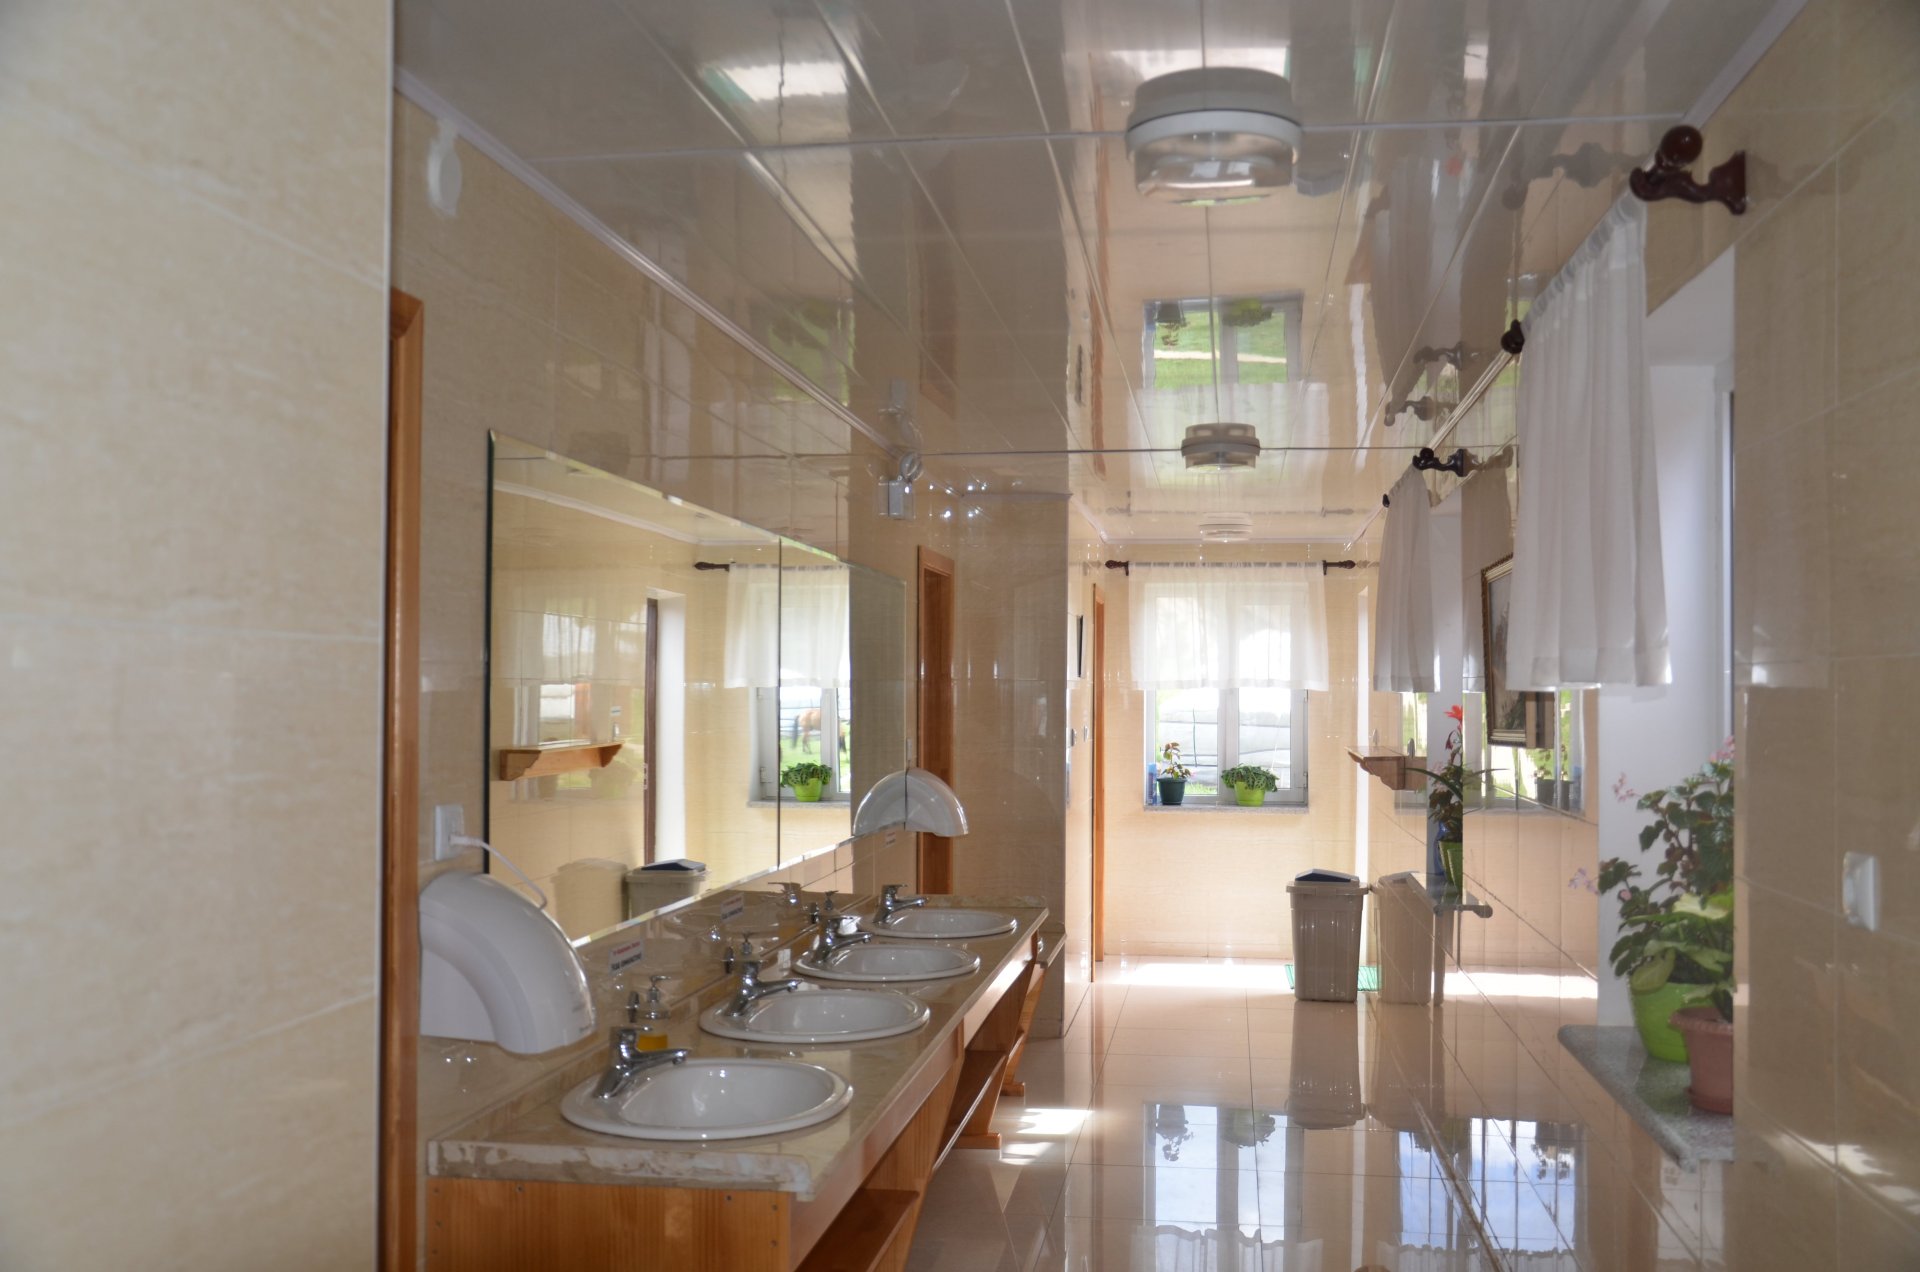 Shower and toilet facilities